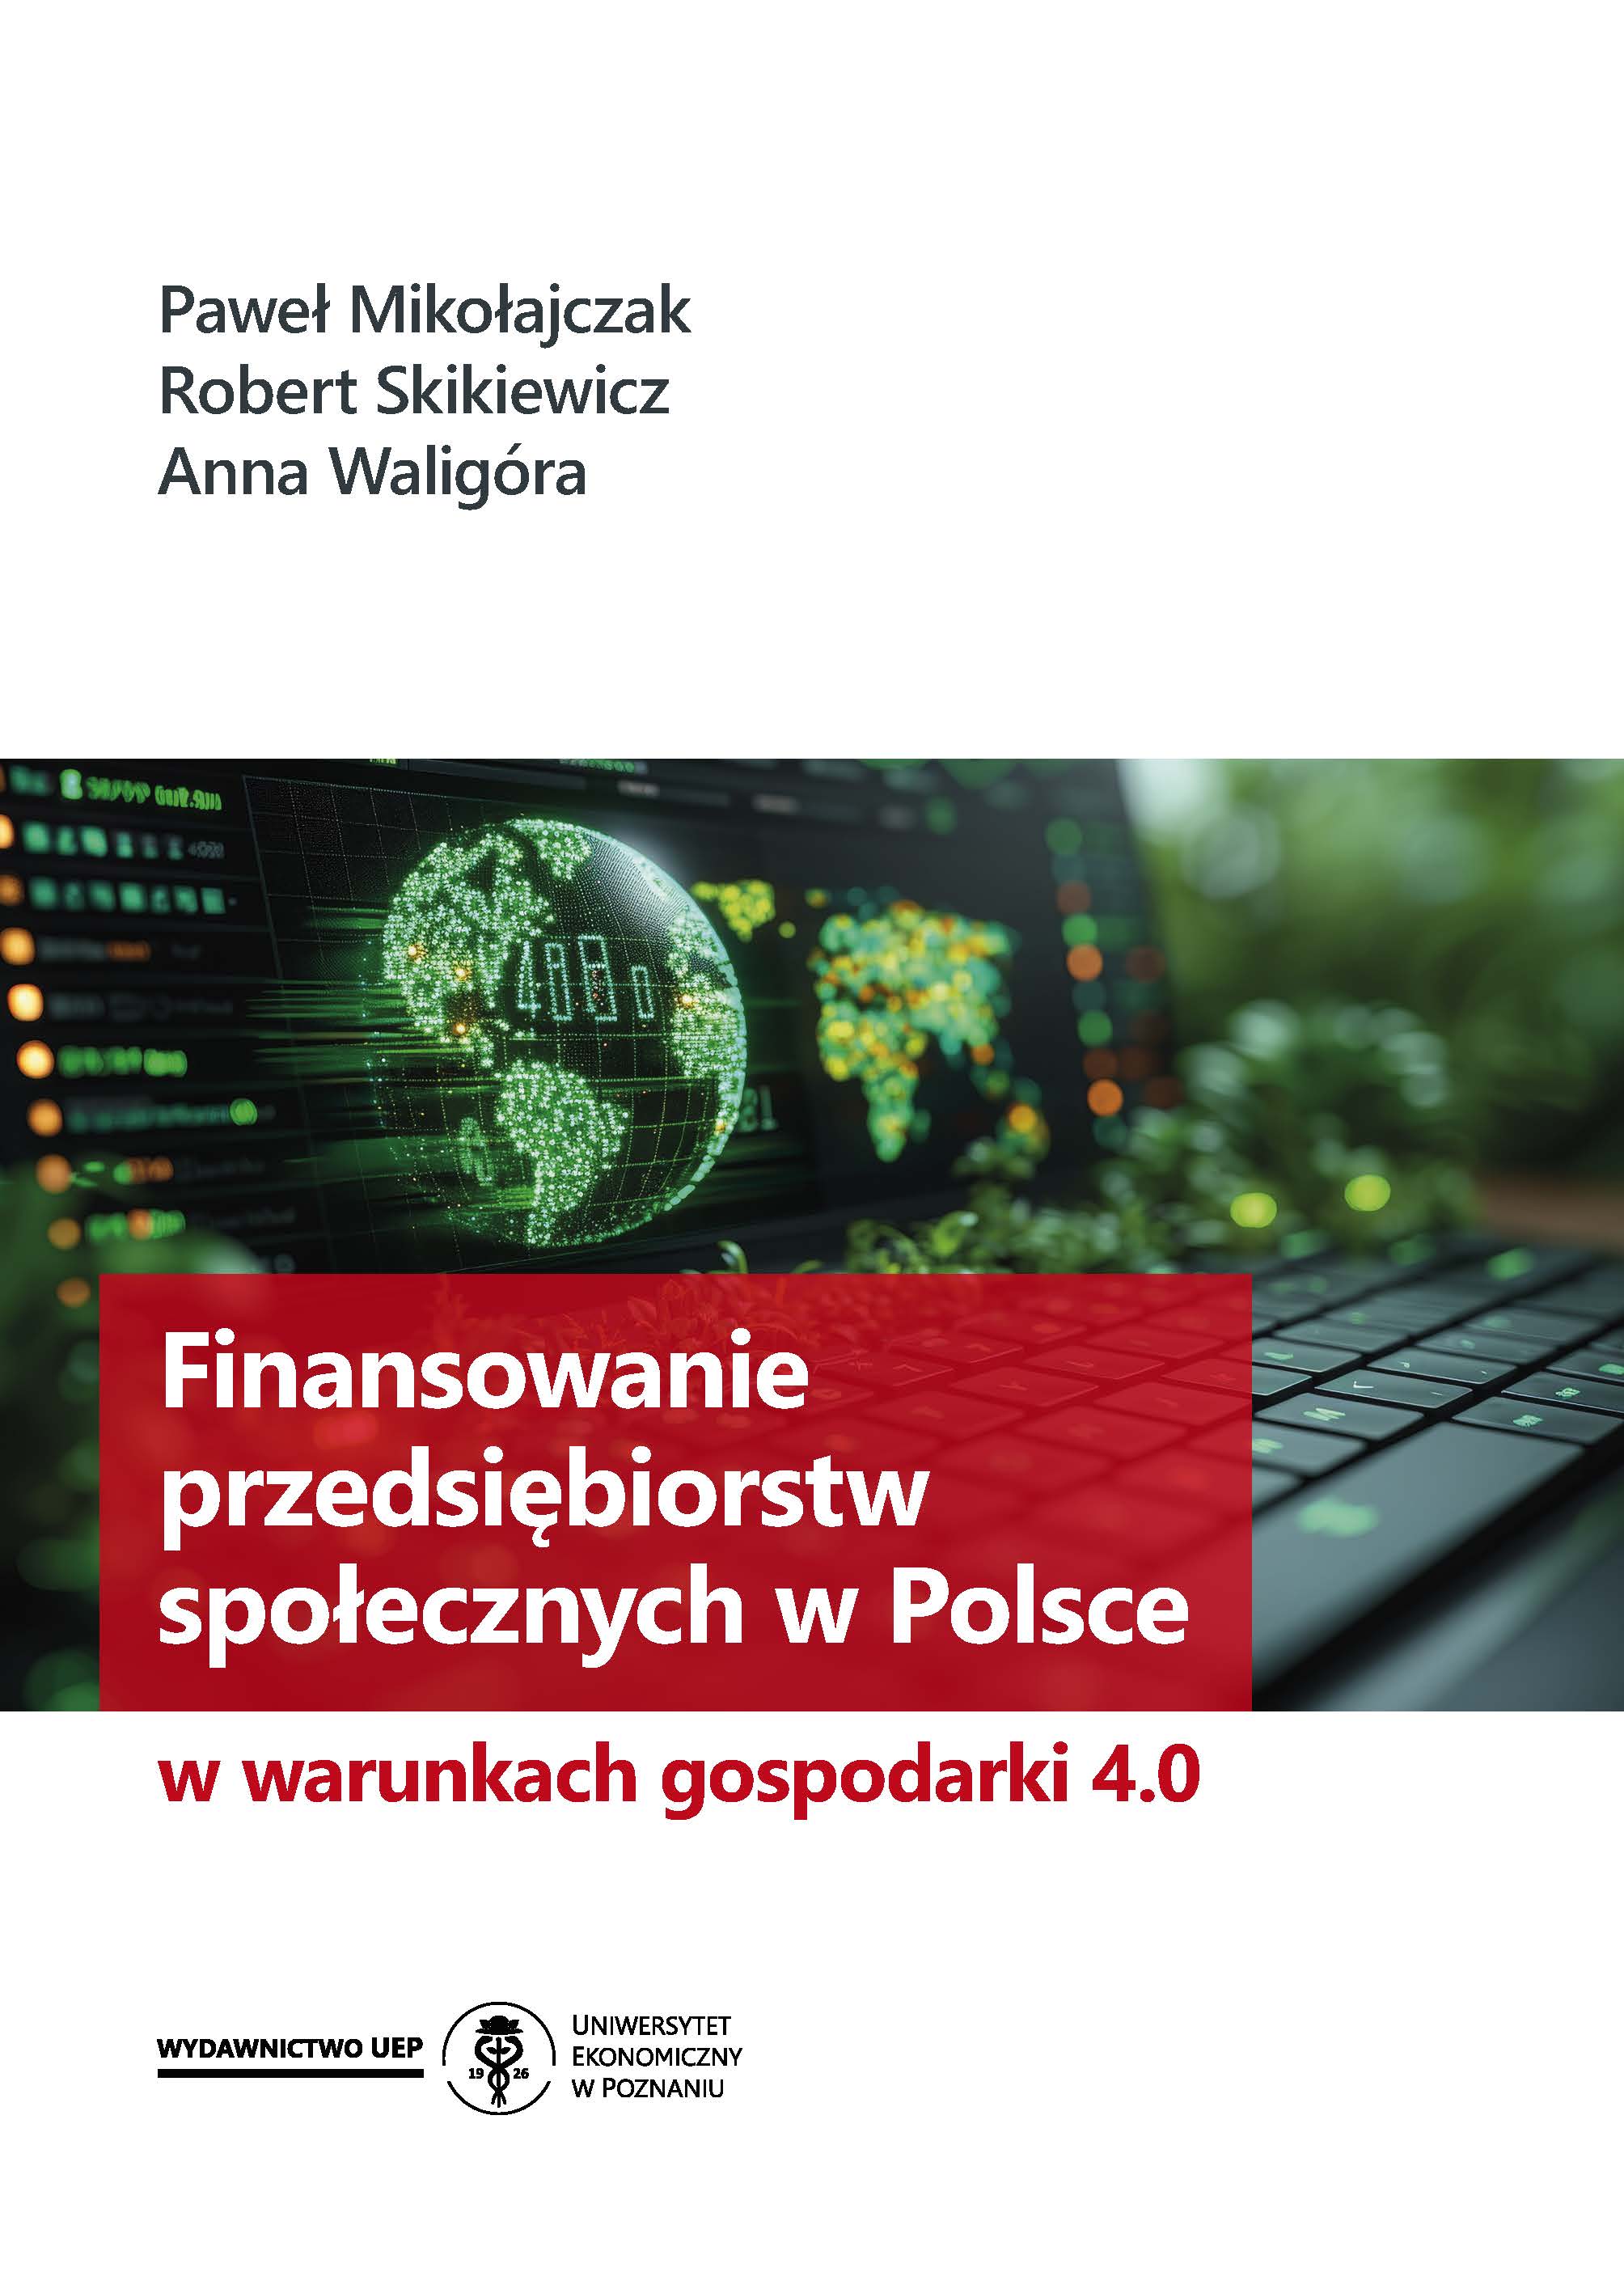 Financing of social enterprises in Poland under the conditions of economy 4.0